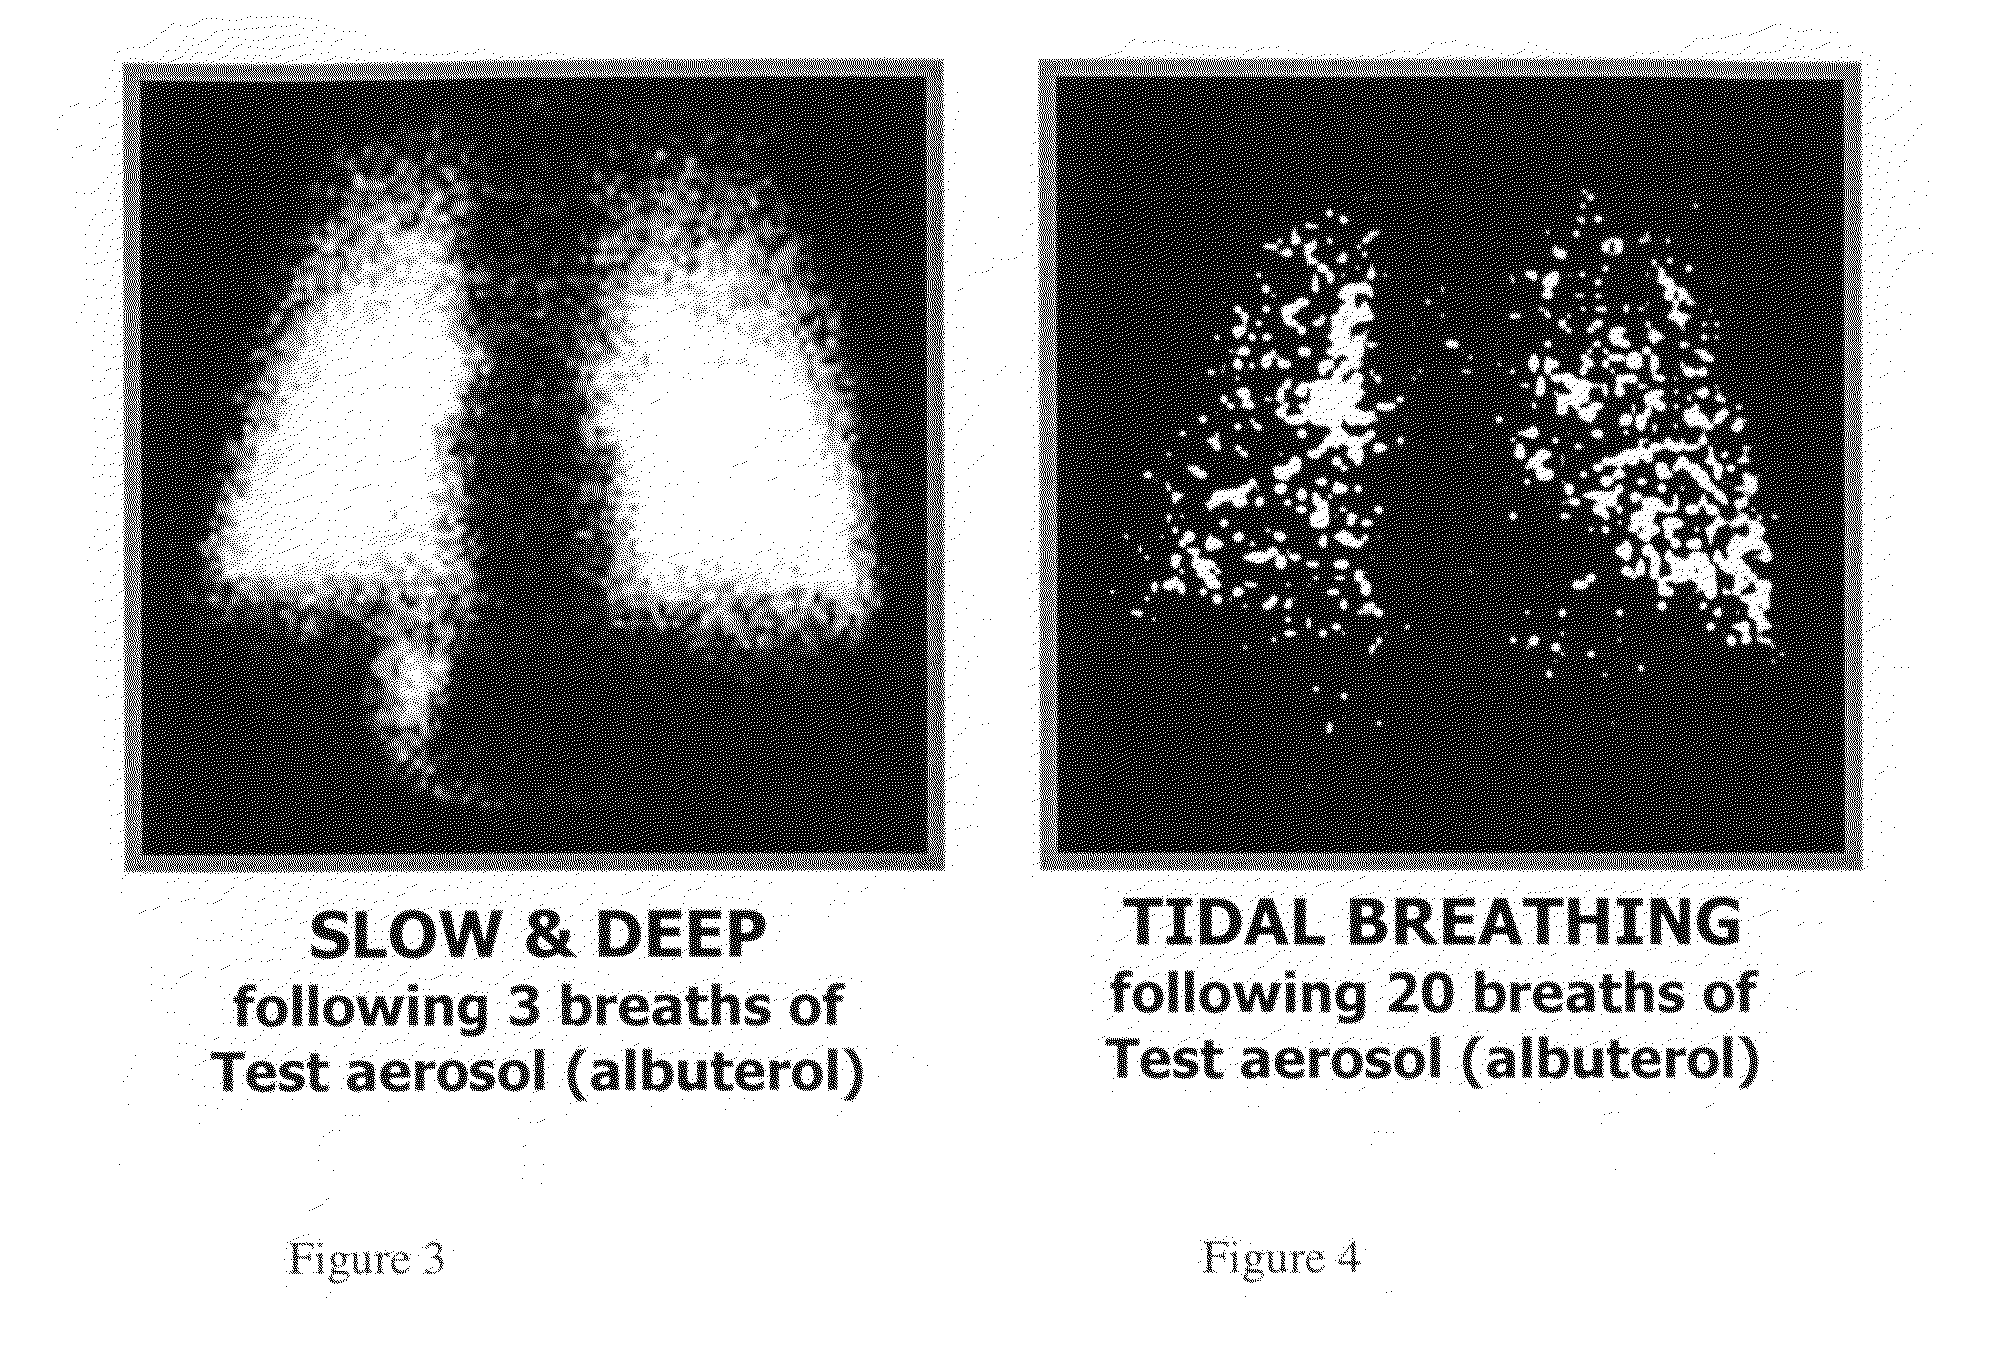 Method of treating tuberculosis with interferons